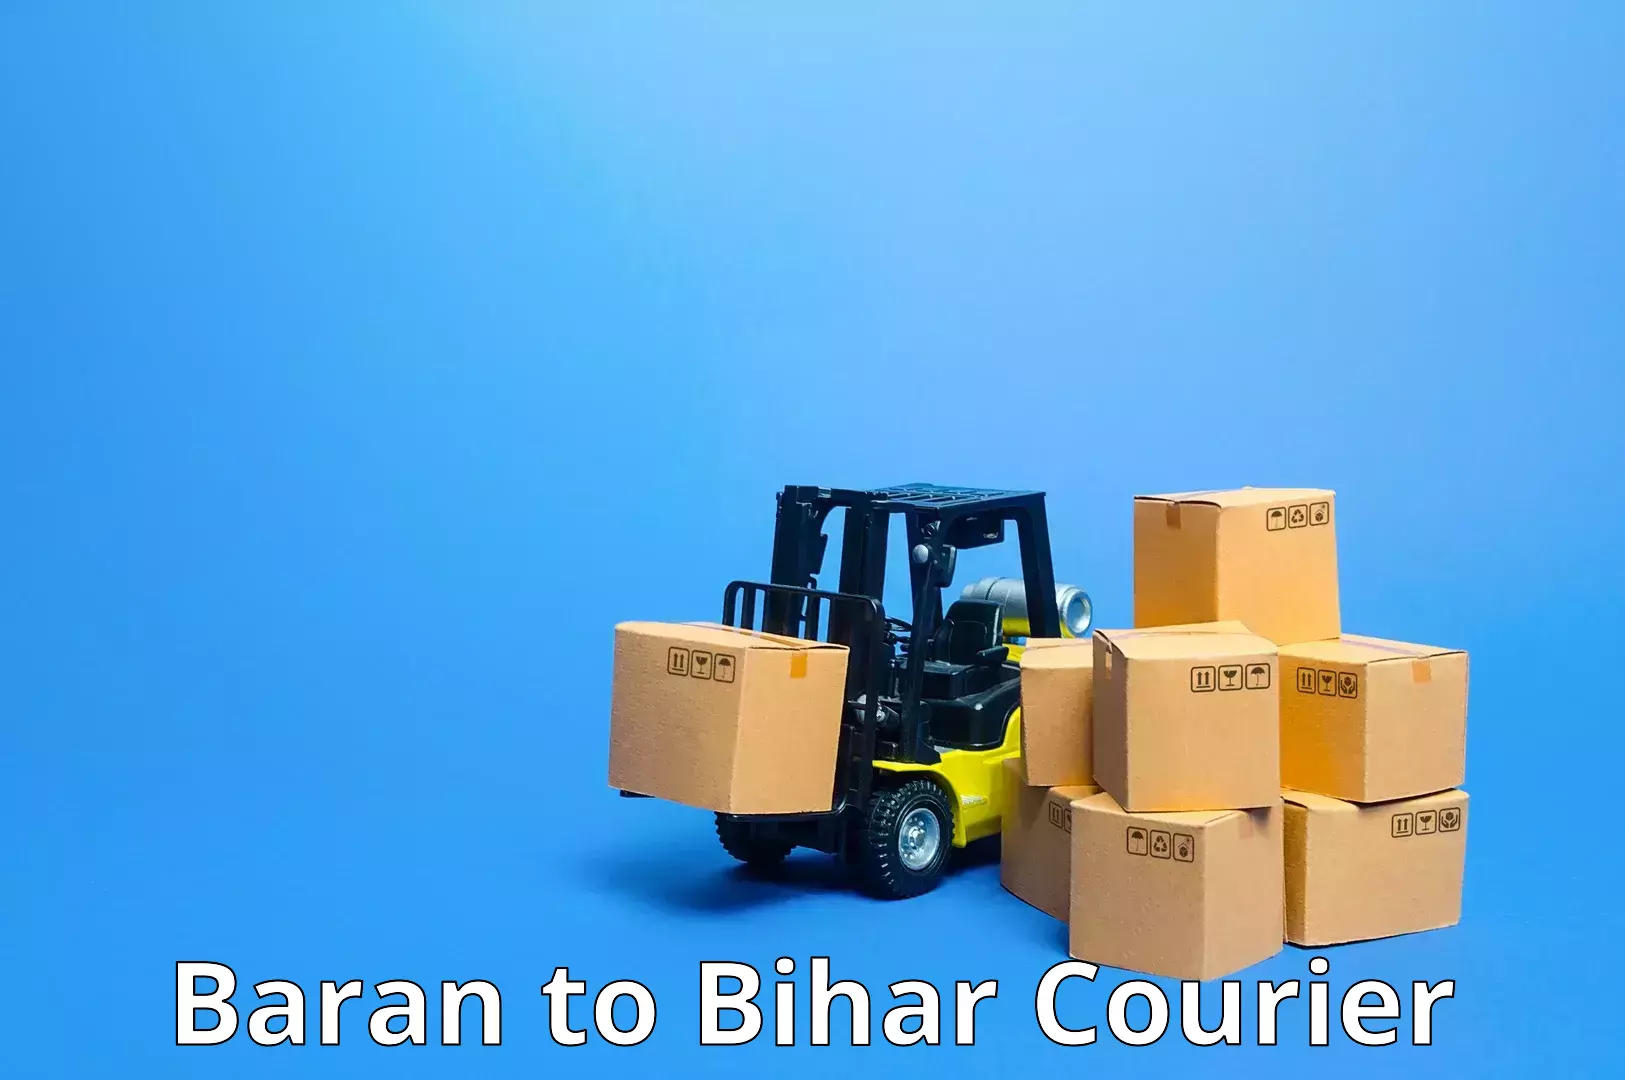 24-hour courier services in Baran to Dinara